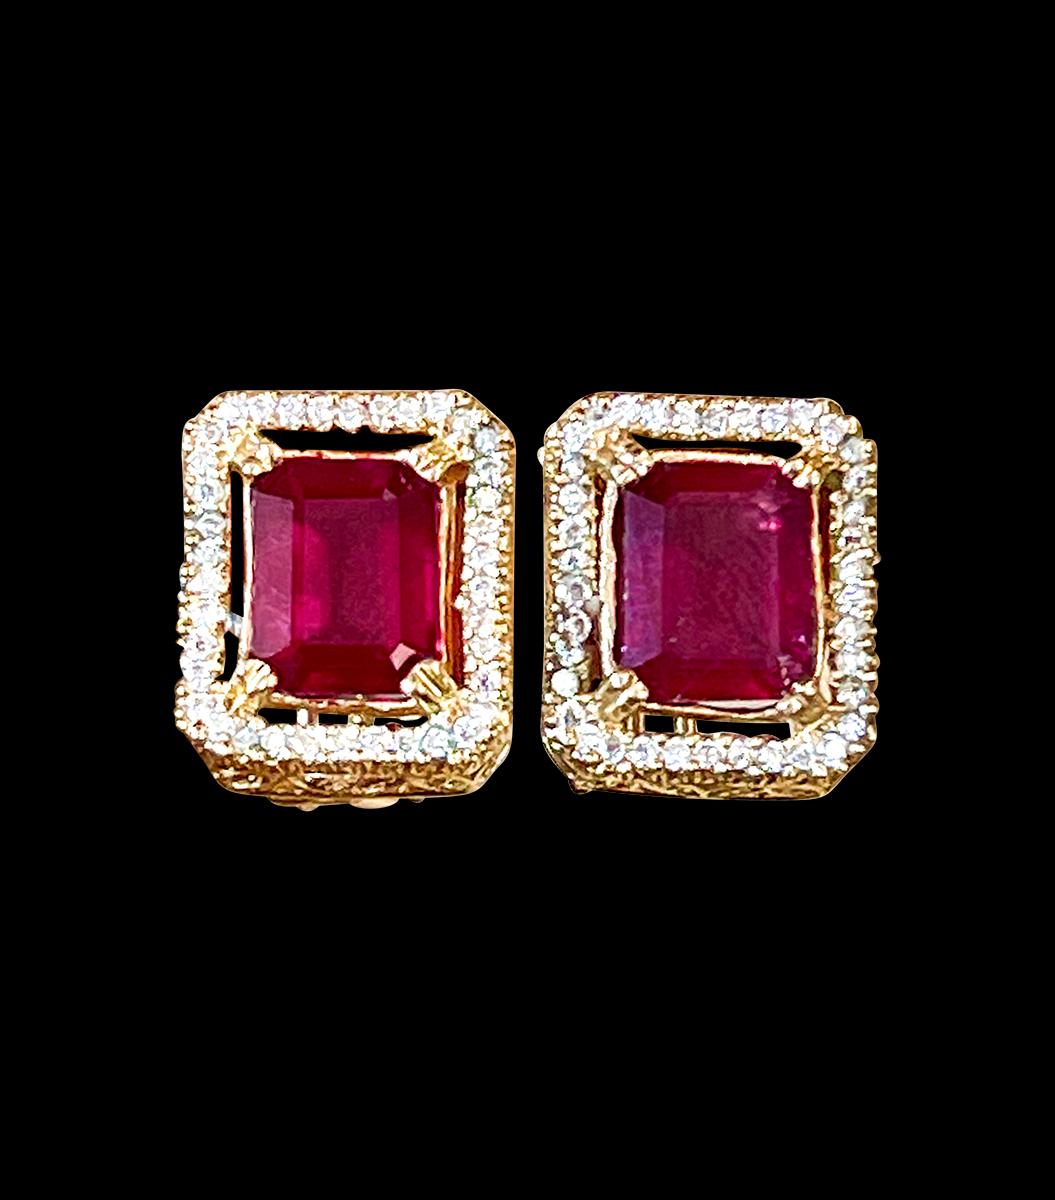 6 Carat Emerald Cut Treated Ruby & .7 Ct Diamond Stud Earrings 14 Kt Yellow Gold . Post Back with omega backs to keep in place
This exquisite pair of earrings are beautifully crafted with 14 karat Yellow  gold .
Weight of 14 K gold 7 Grams
Ruby pair